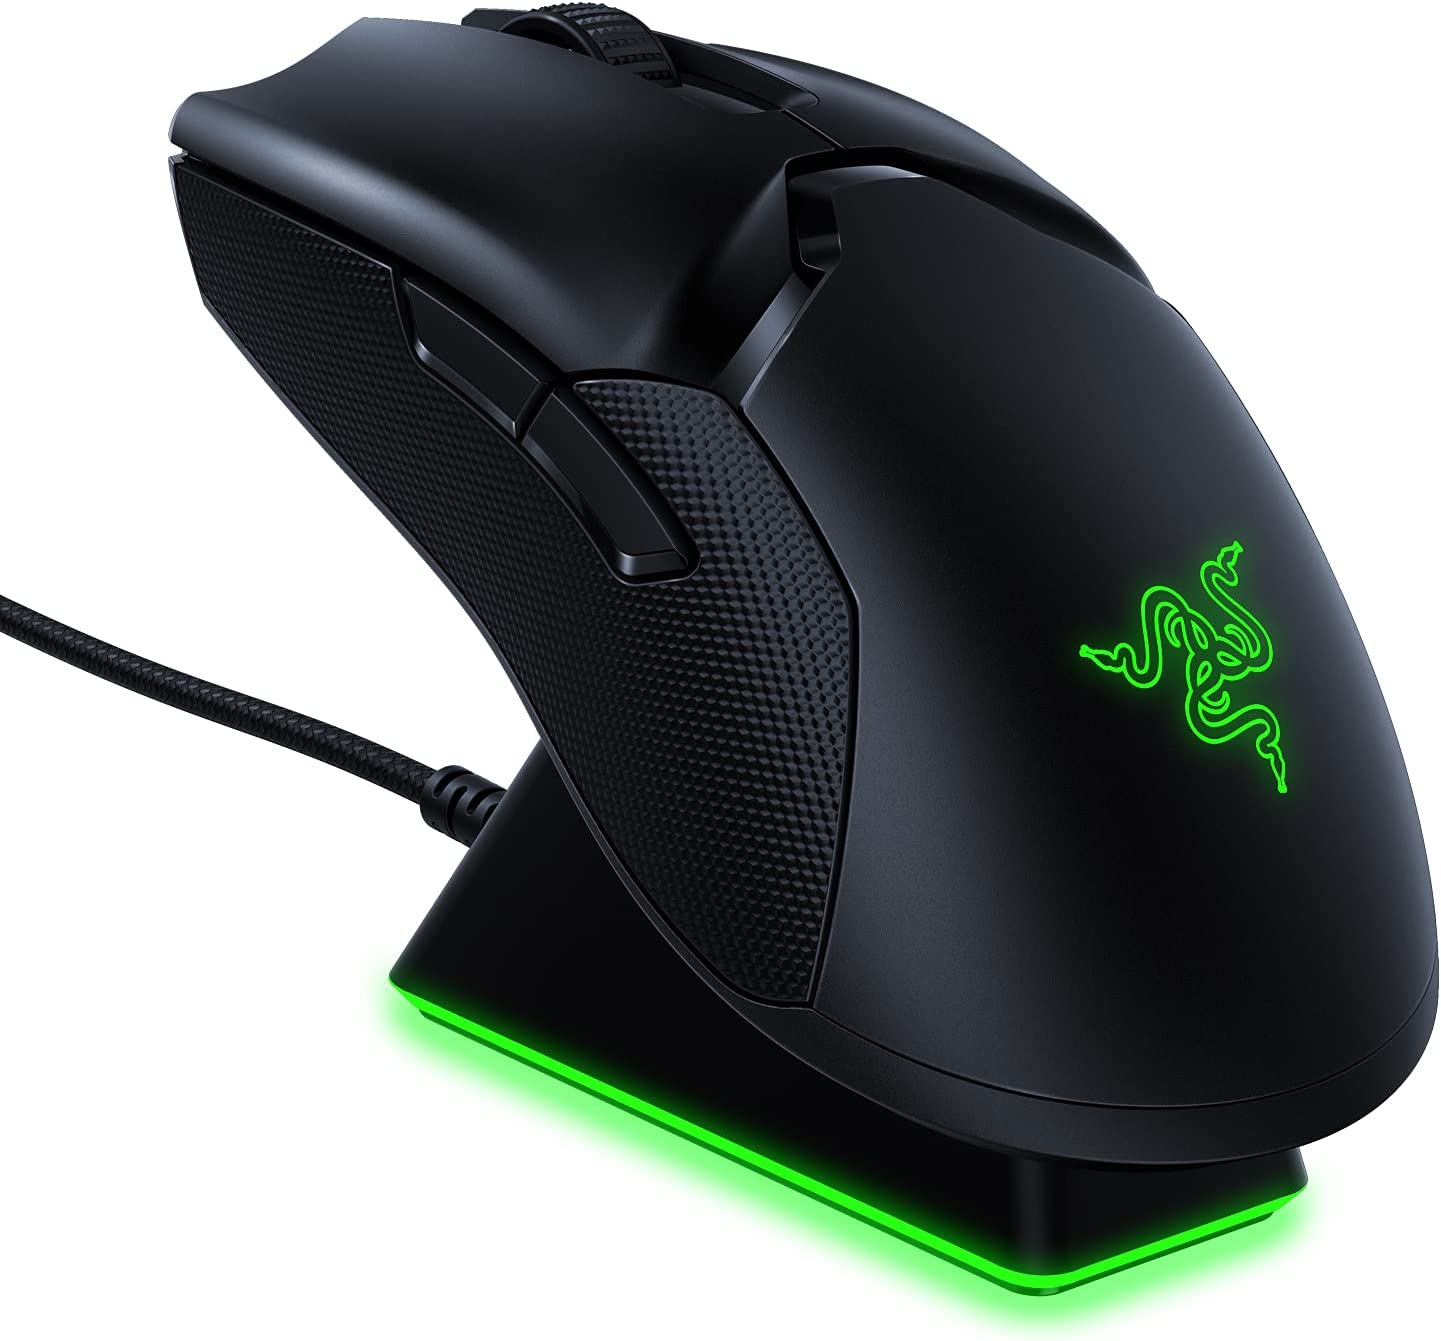 The features of this ambidextrous gaming mouse are definitely worth the cost.